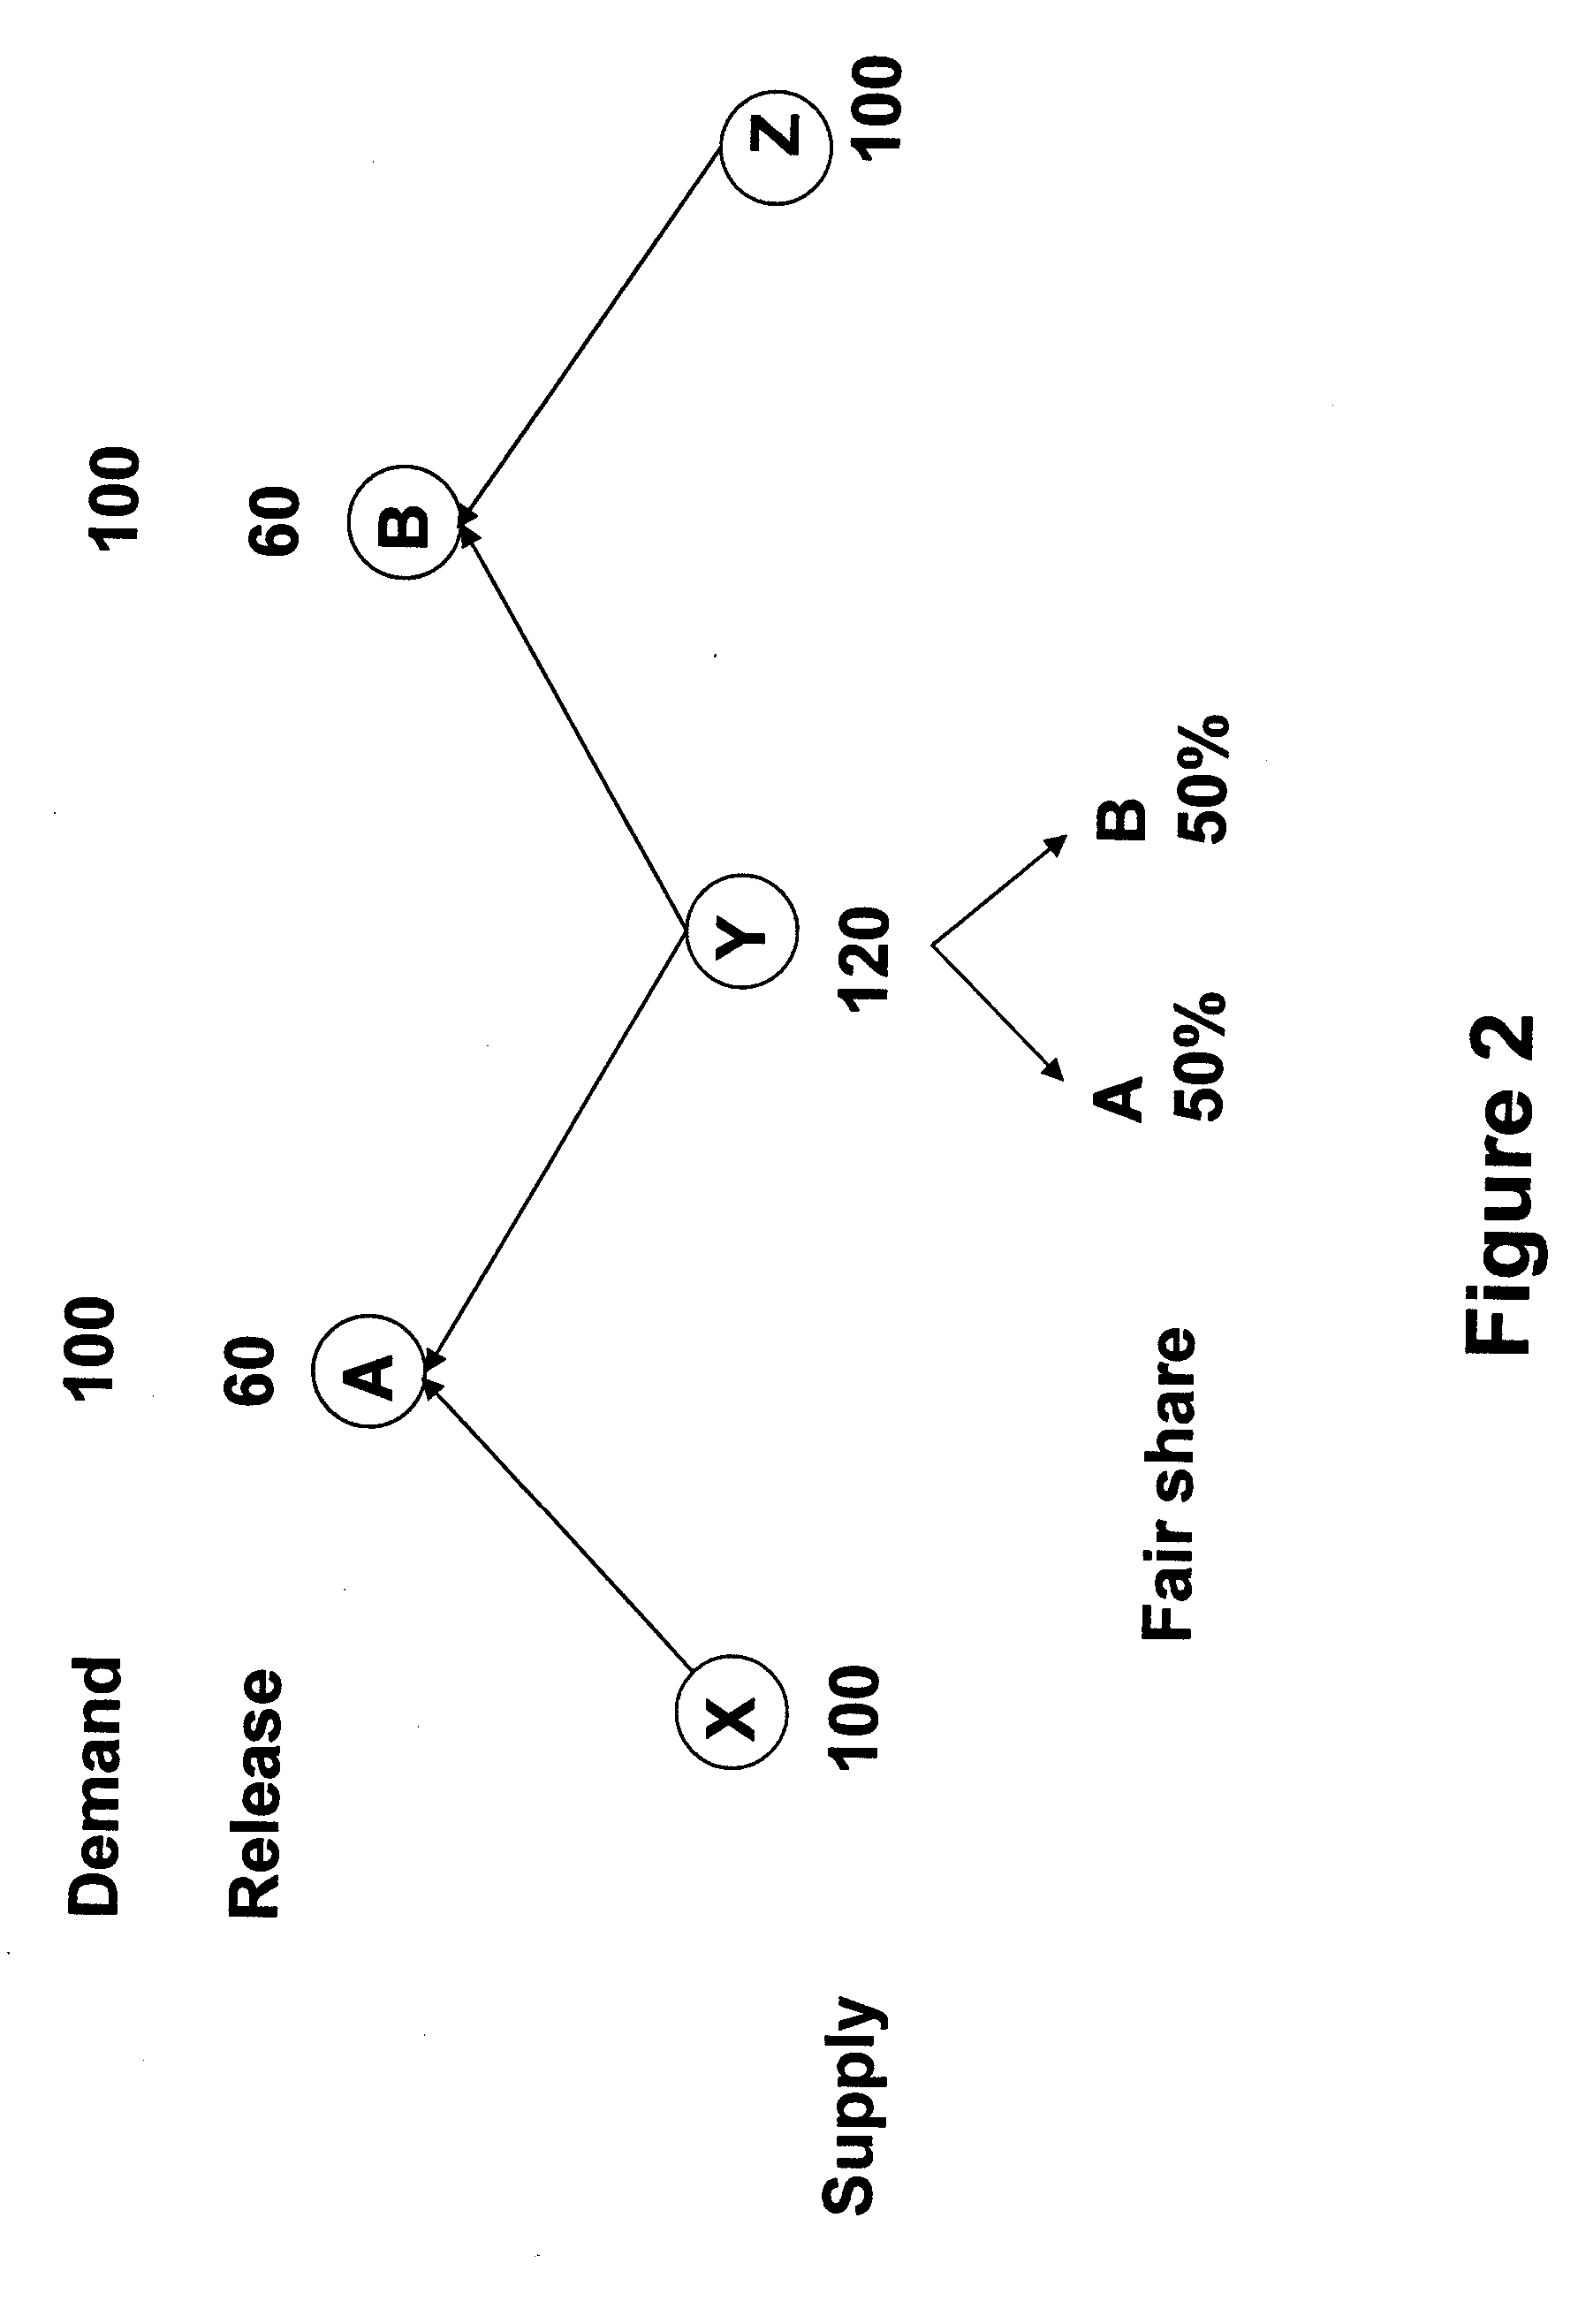 Method for fair sharing limited resources between multiple customers